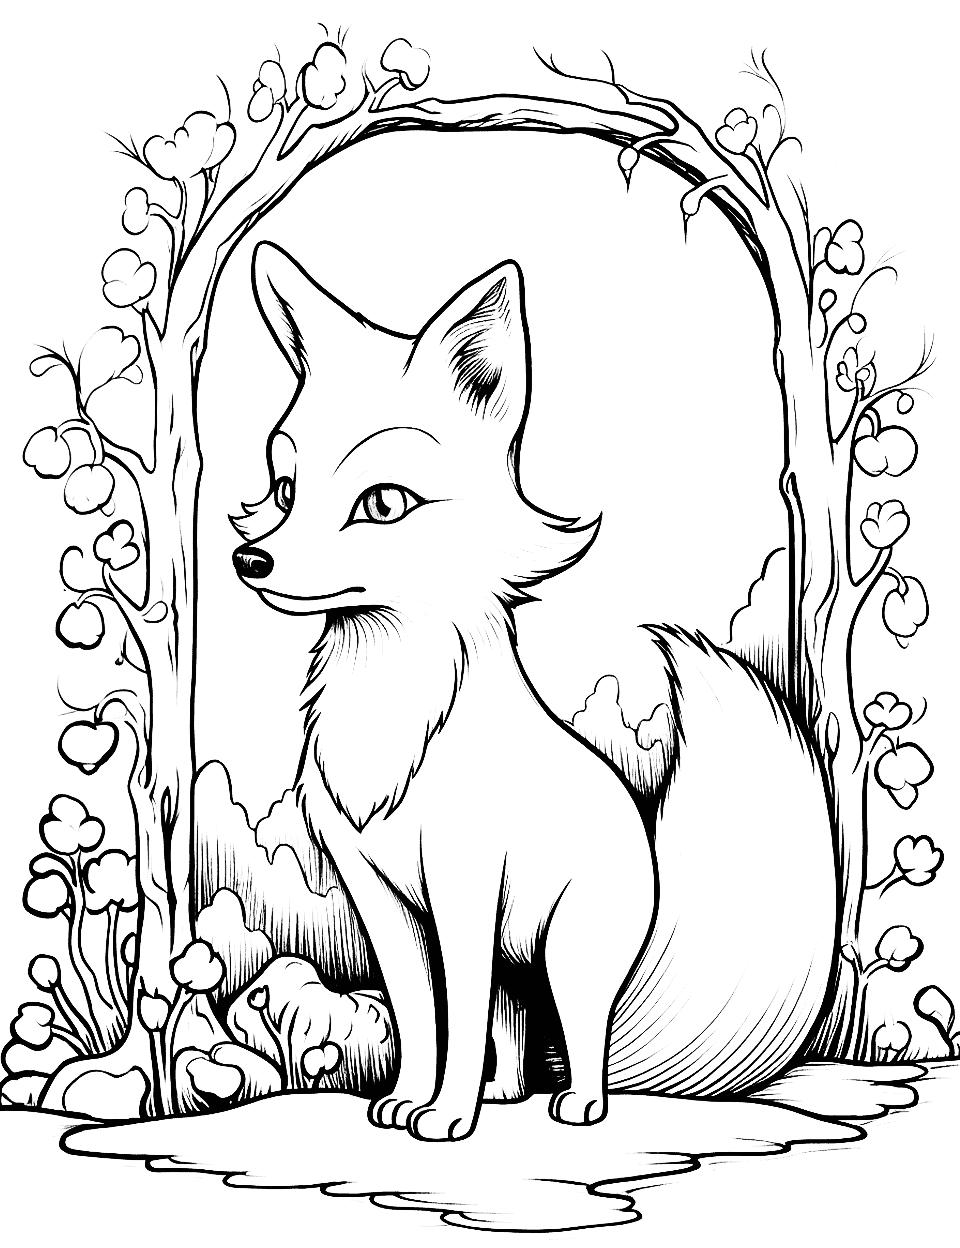 Fox's Enchanted Mirror Fox Coloring Page - A fox coming out of a magical mirror.